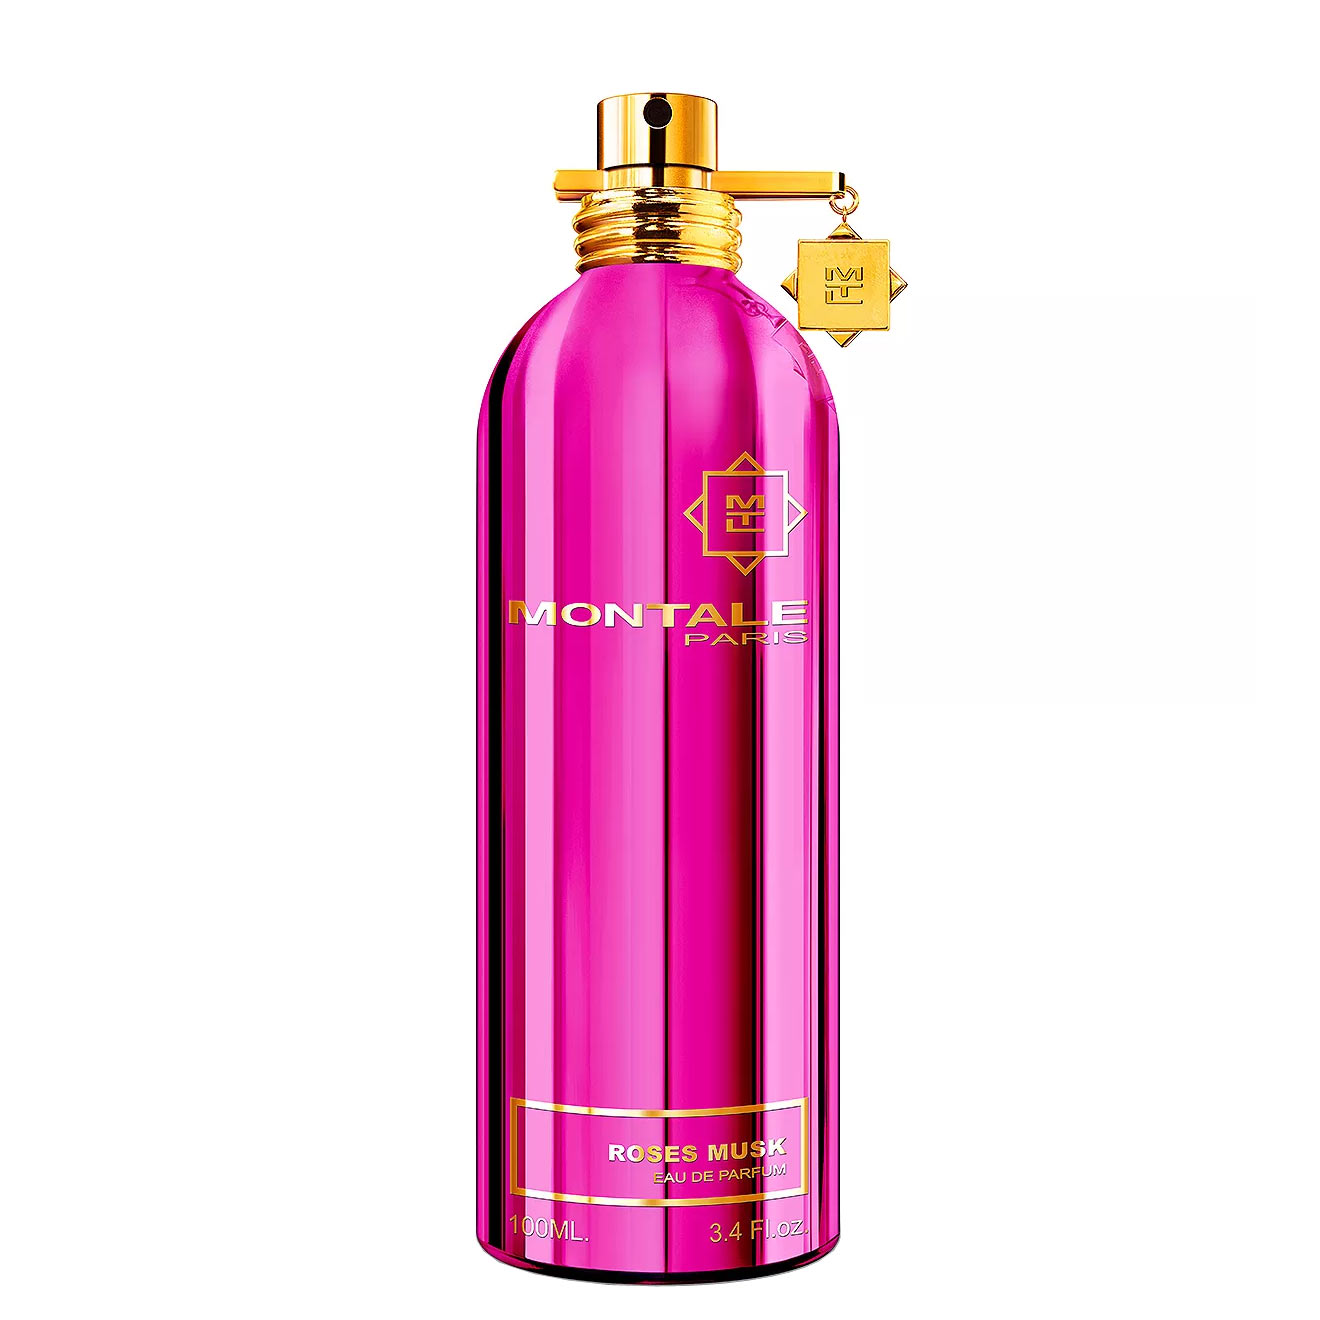 Roses Musk Montale Image